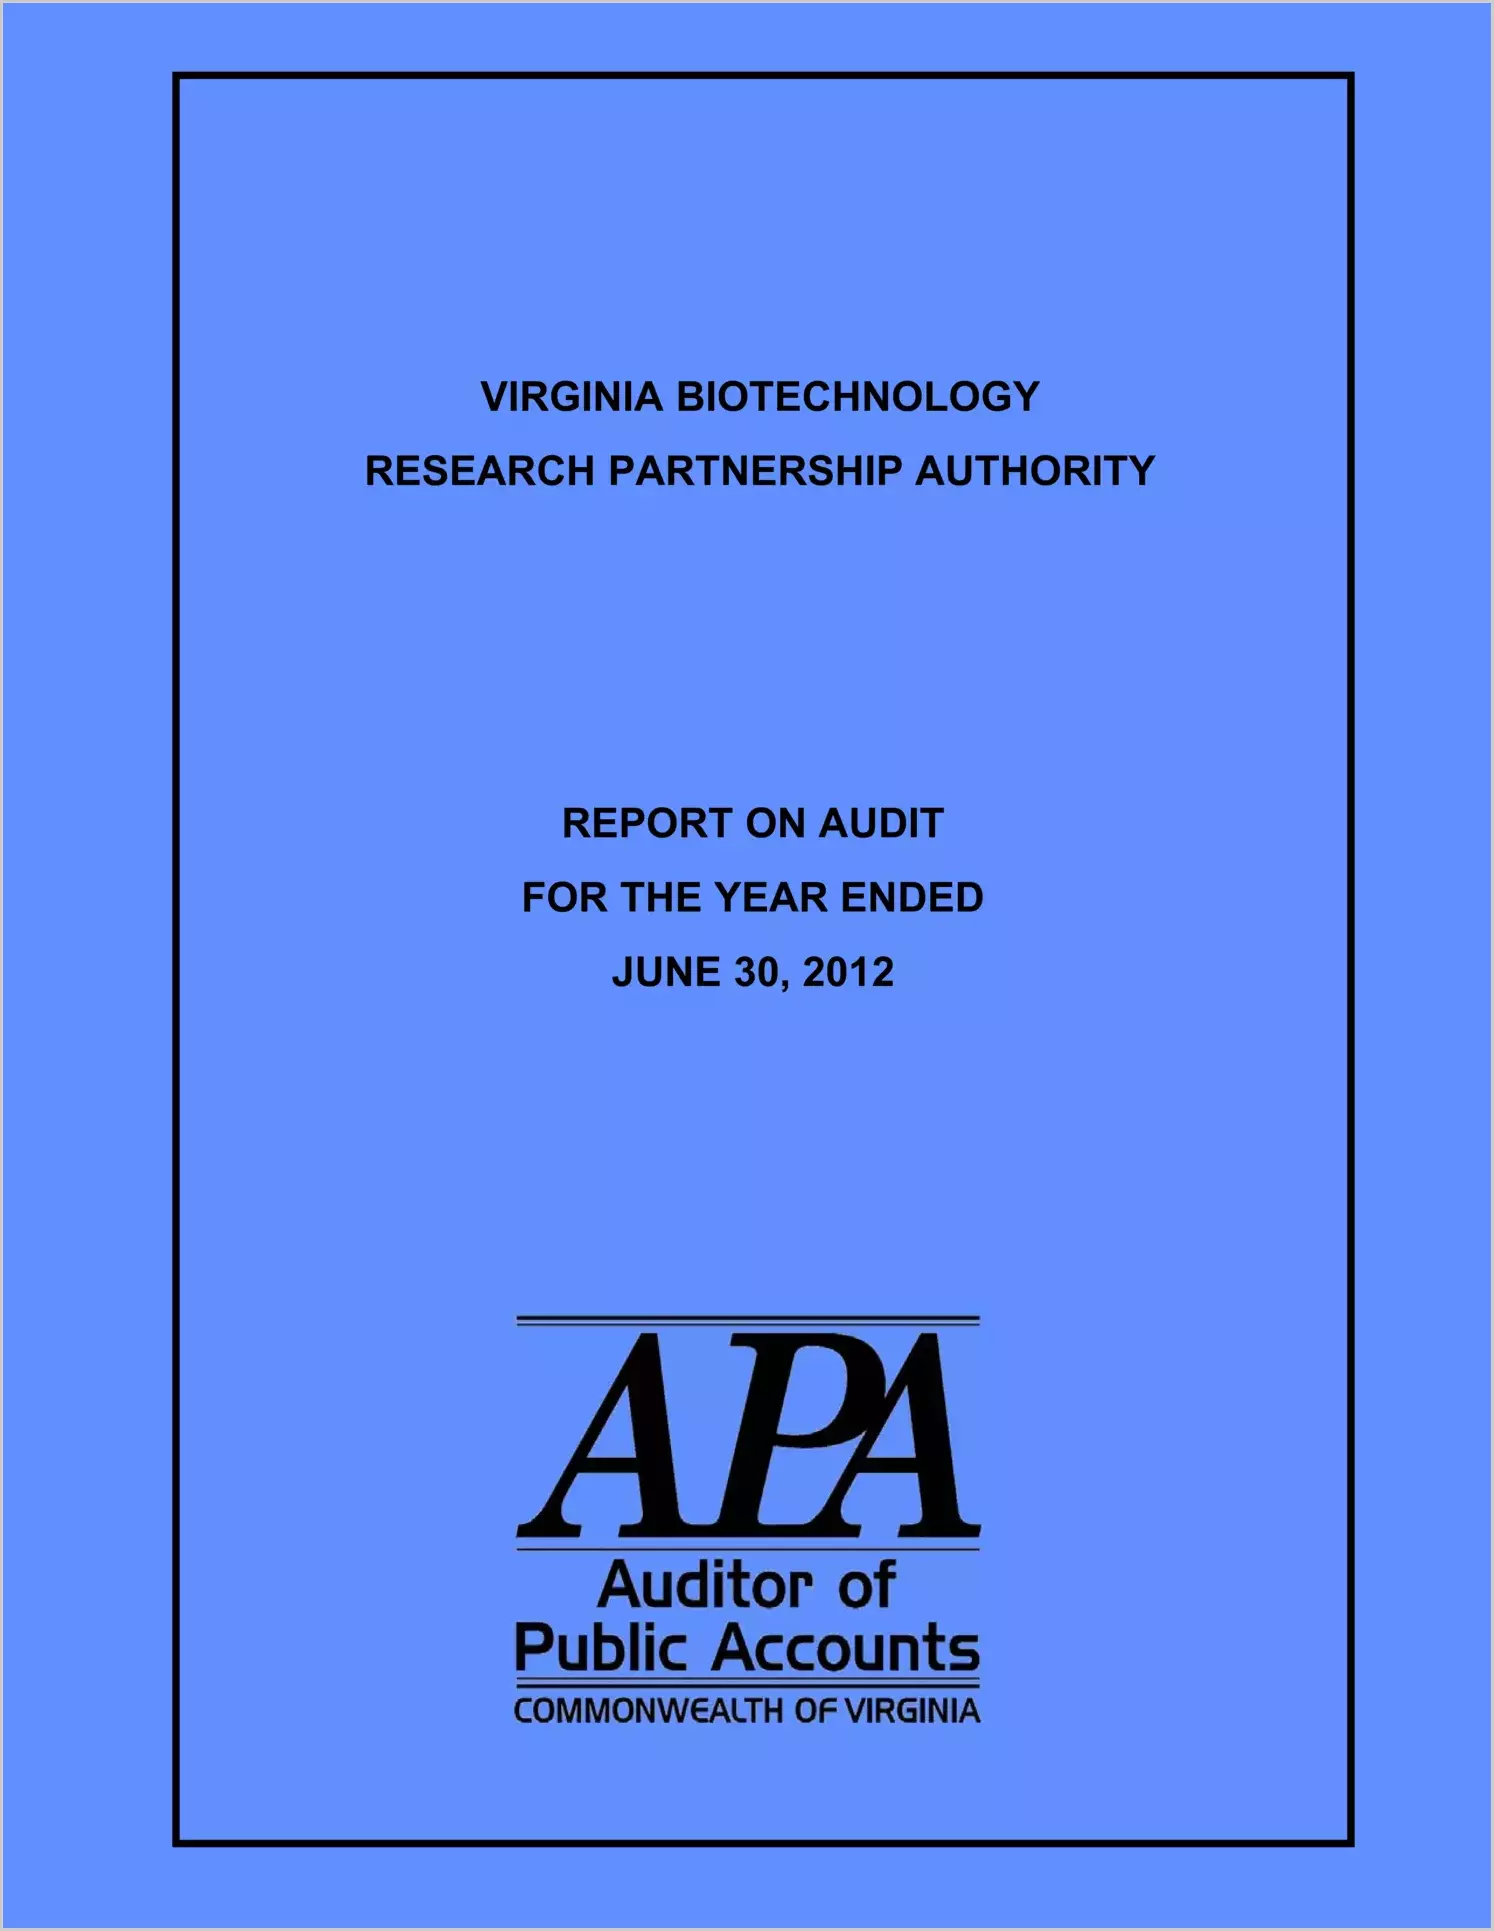 Virginia Biotechnology Research Partnership Authority for the year ended June 30, 2012